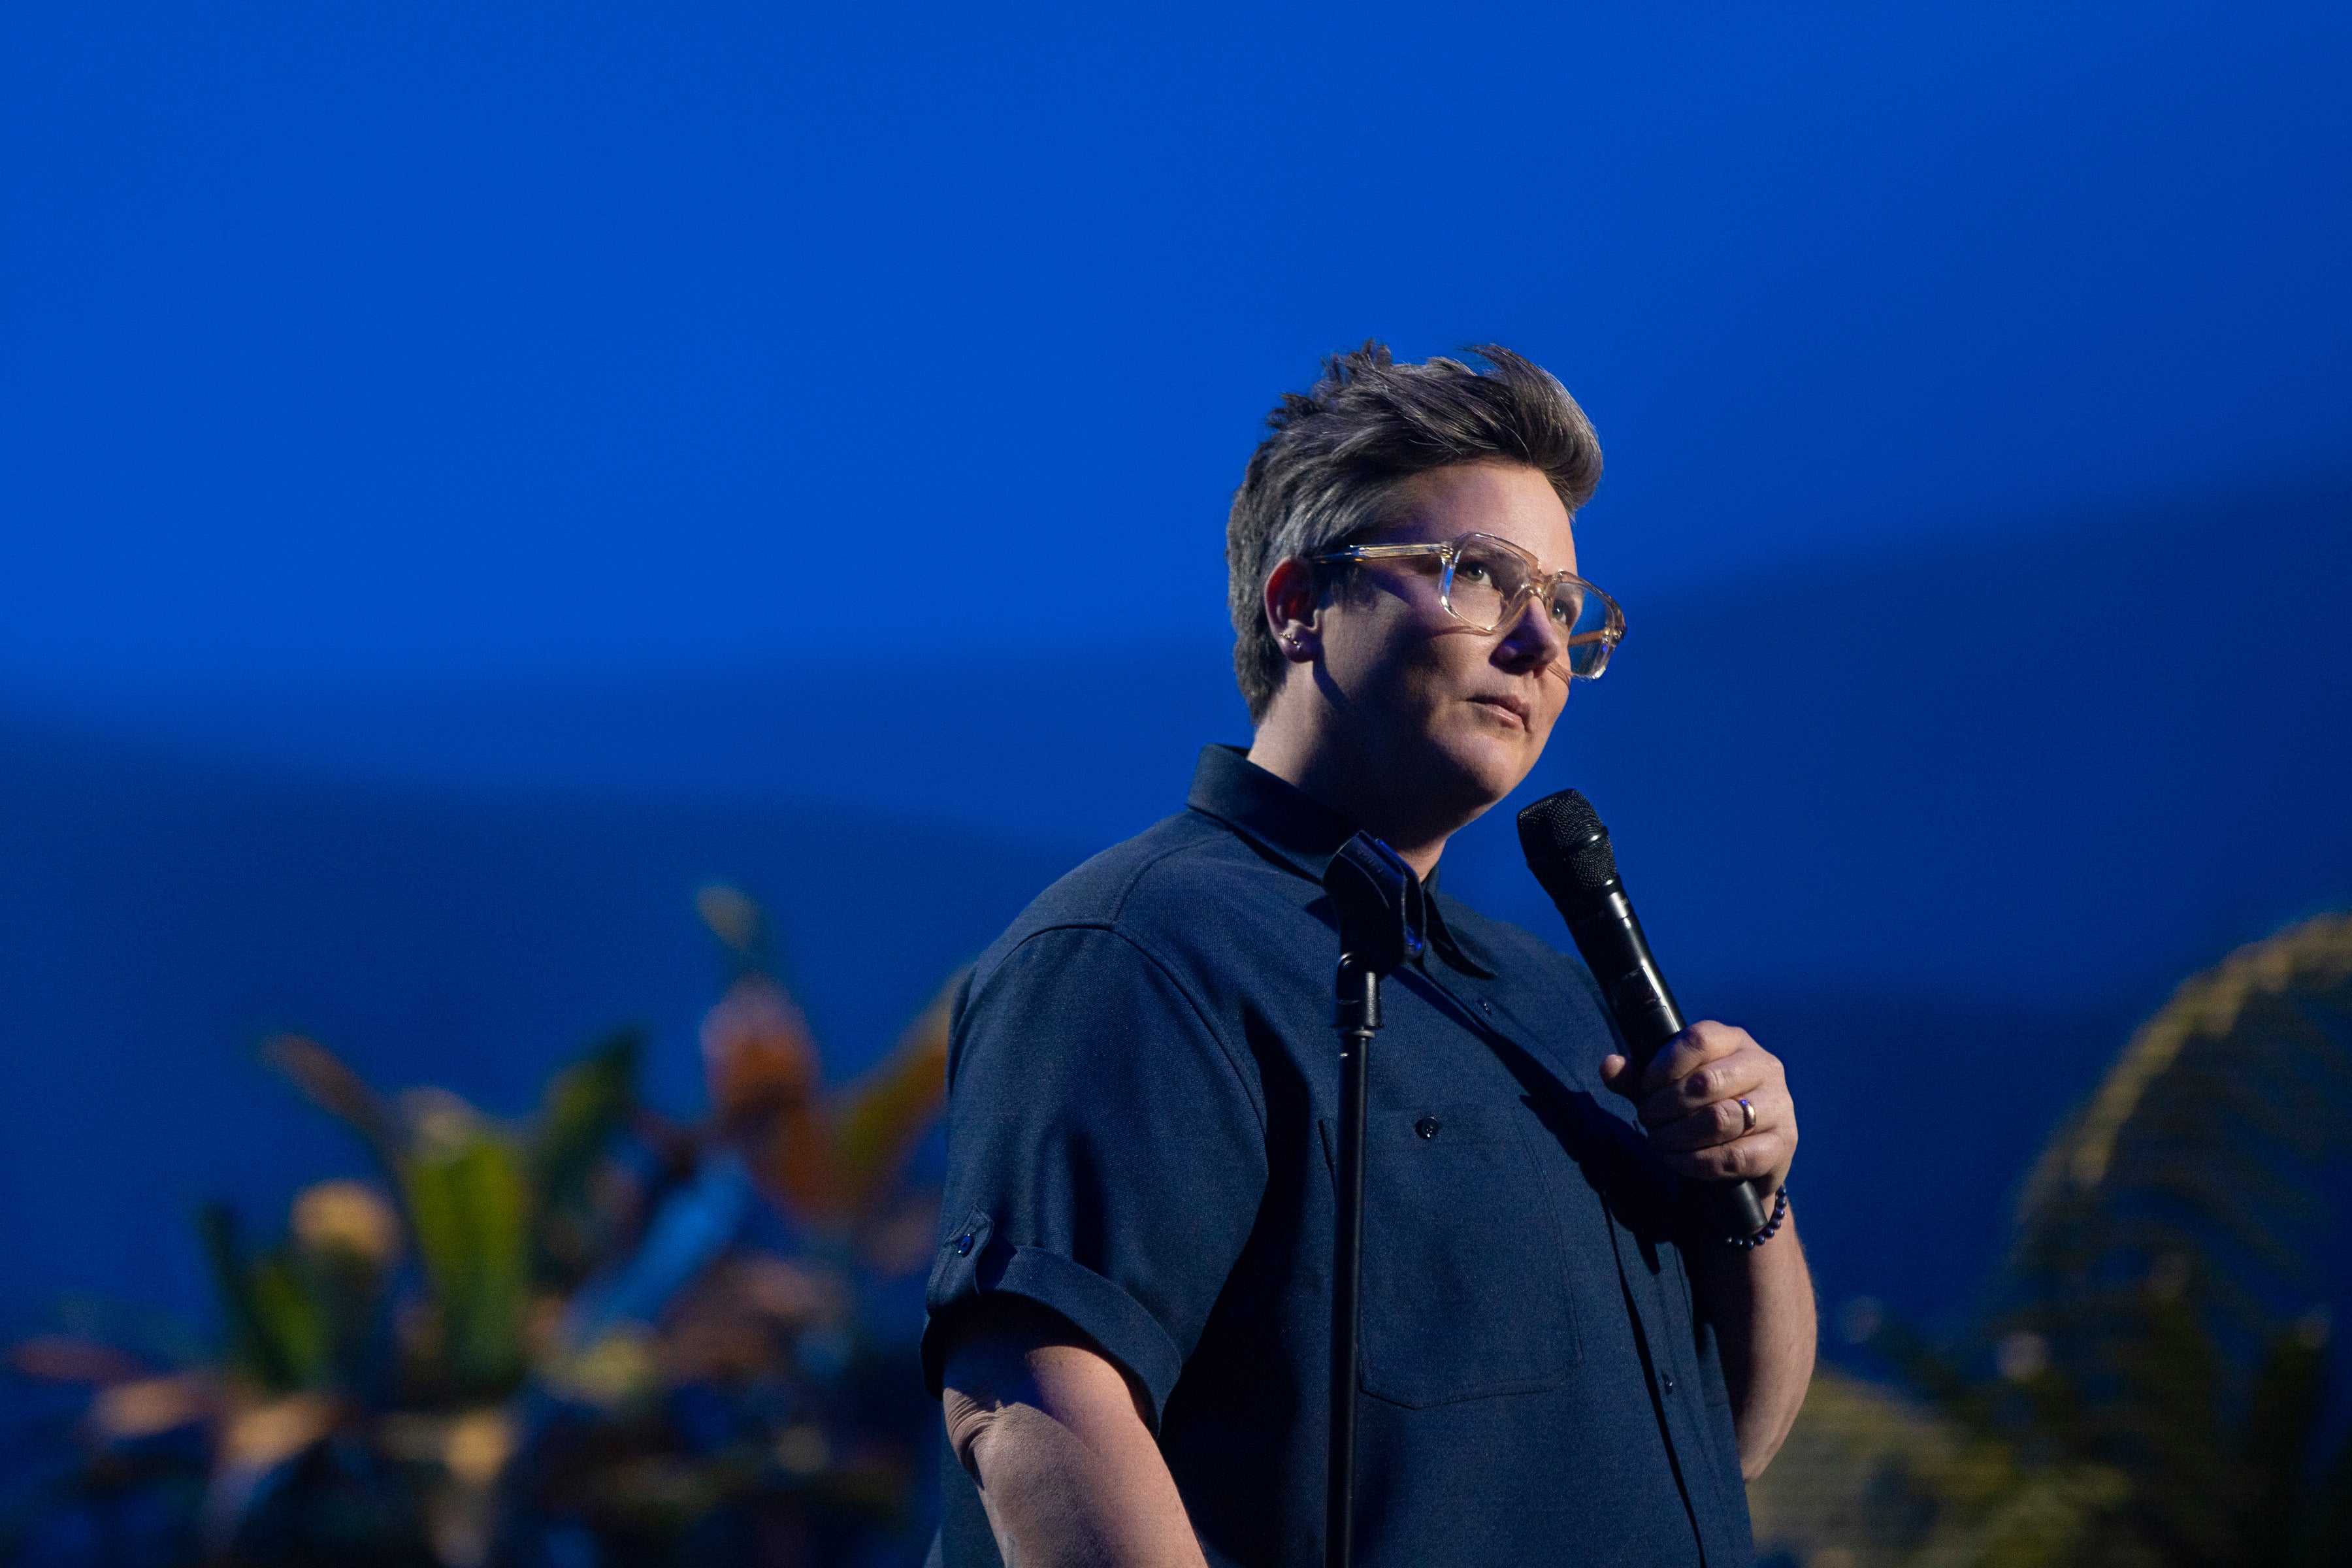 The comedian stands in front of a blue background and some rather tropical-looking plants, wearing a large navy-blue buttondown. They pause and gaze up at the folks in the higher seats.